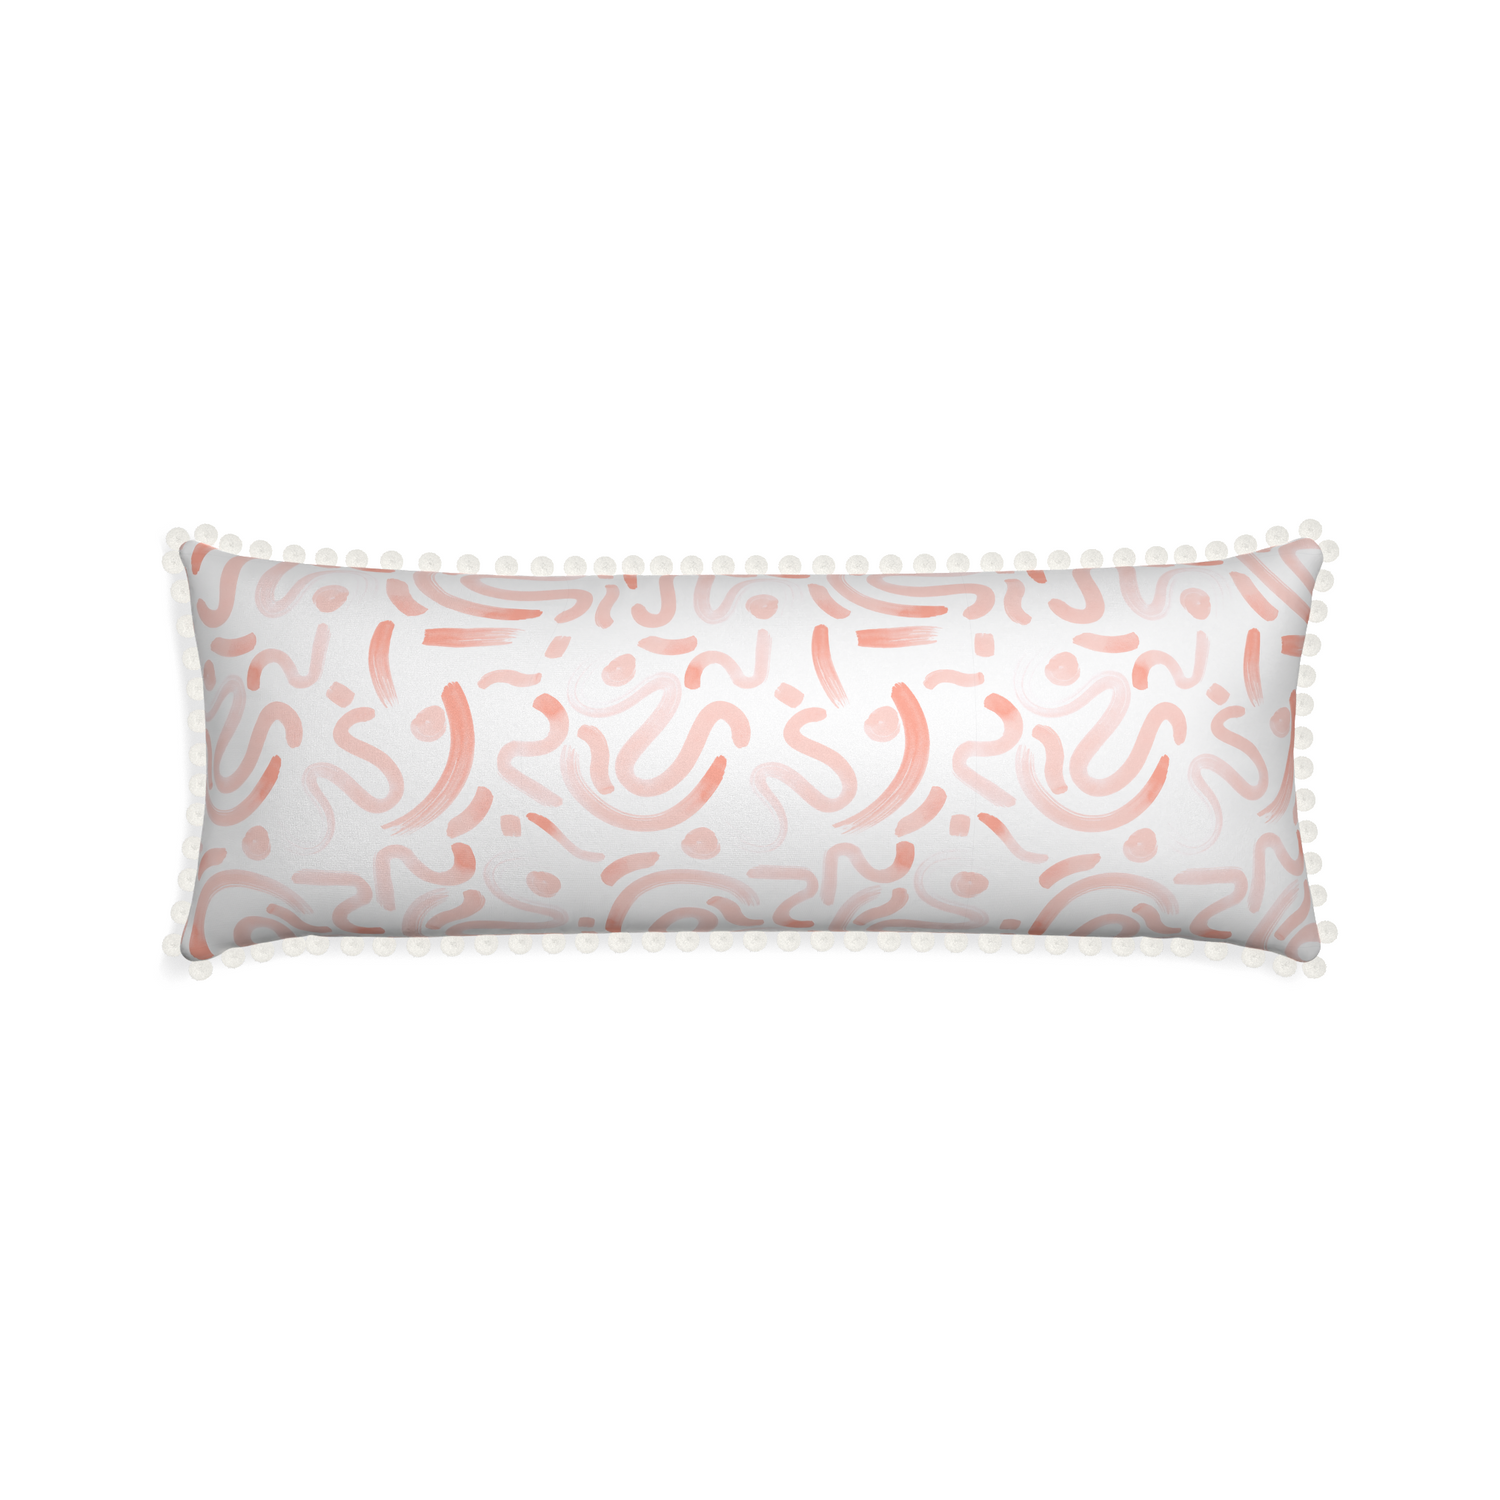 Xl-lumbar hockney pink custom pink graphicpillow with snow pom pom on white background